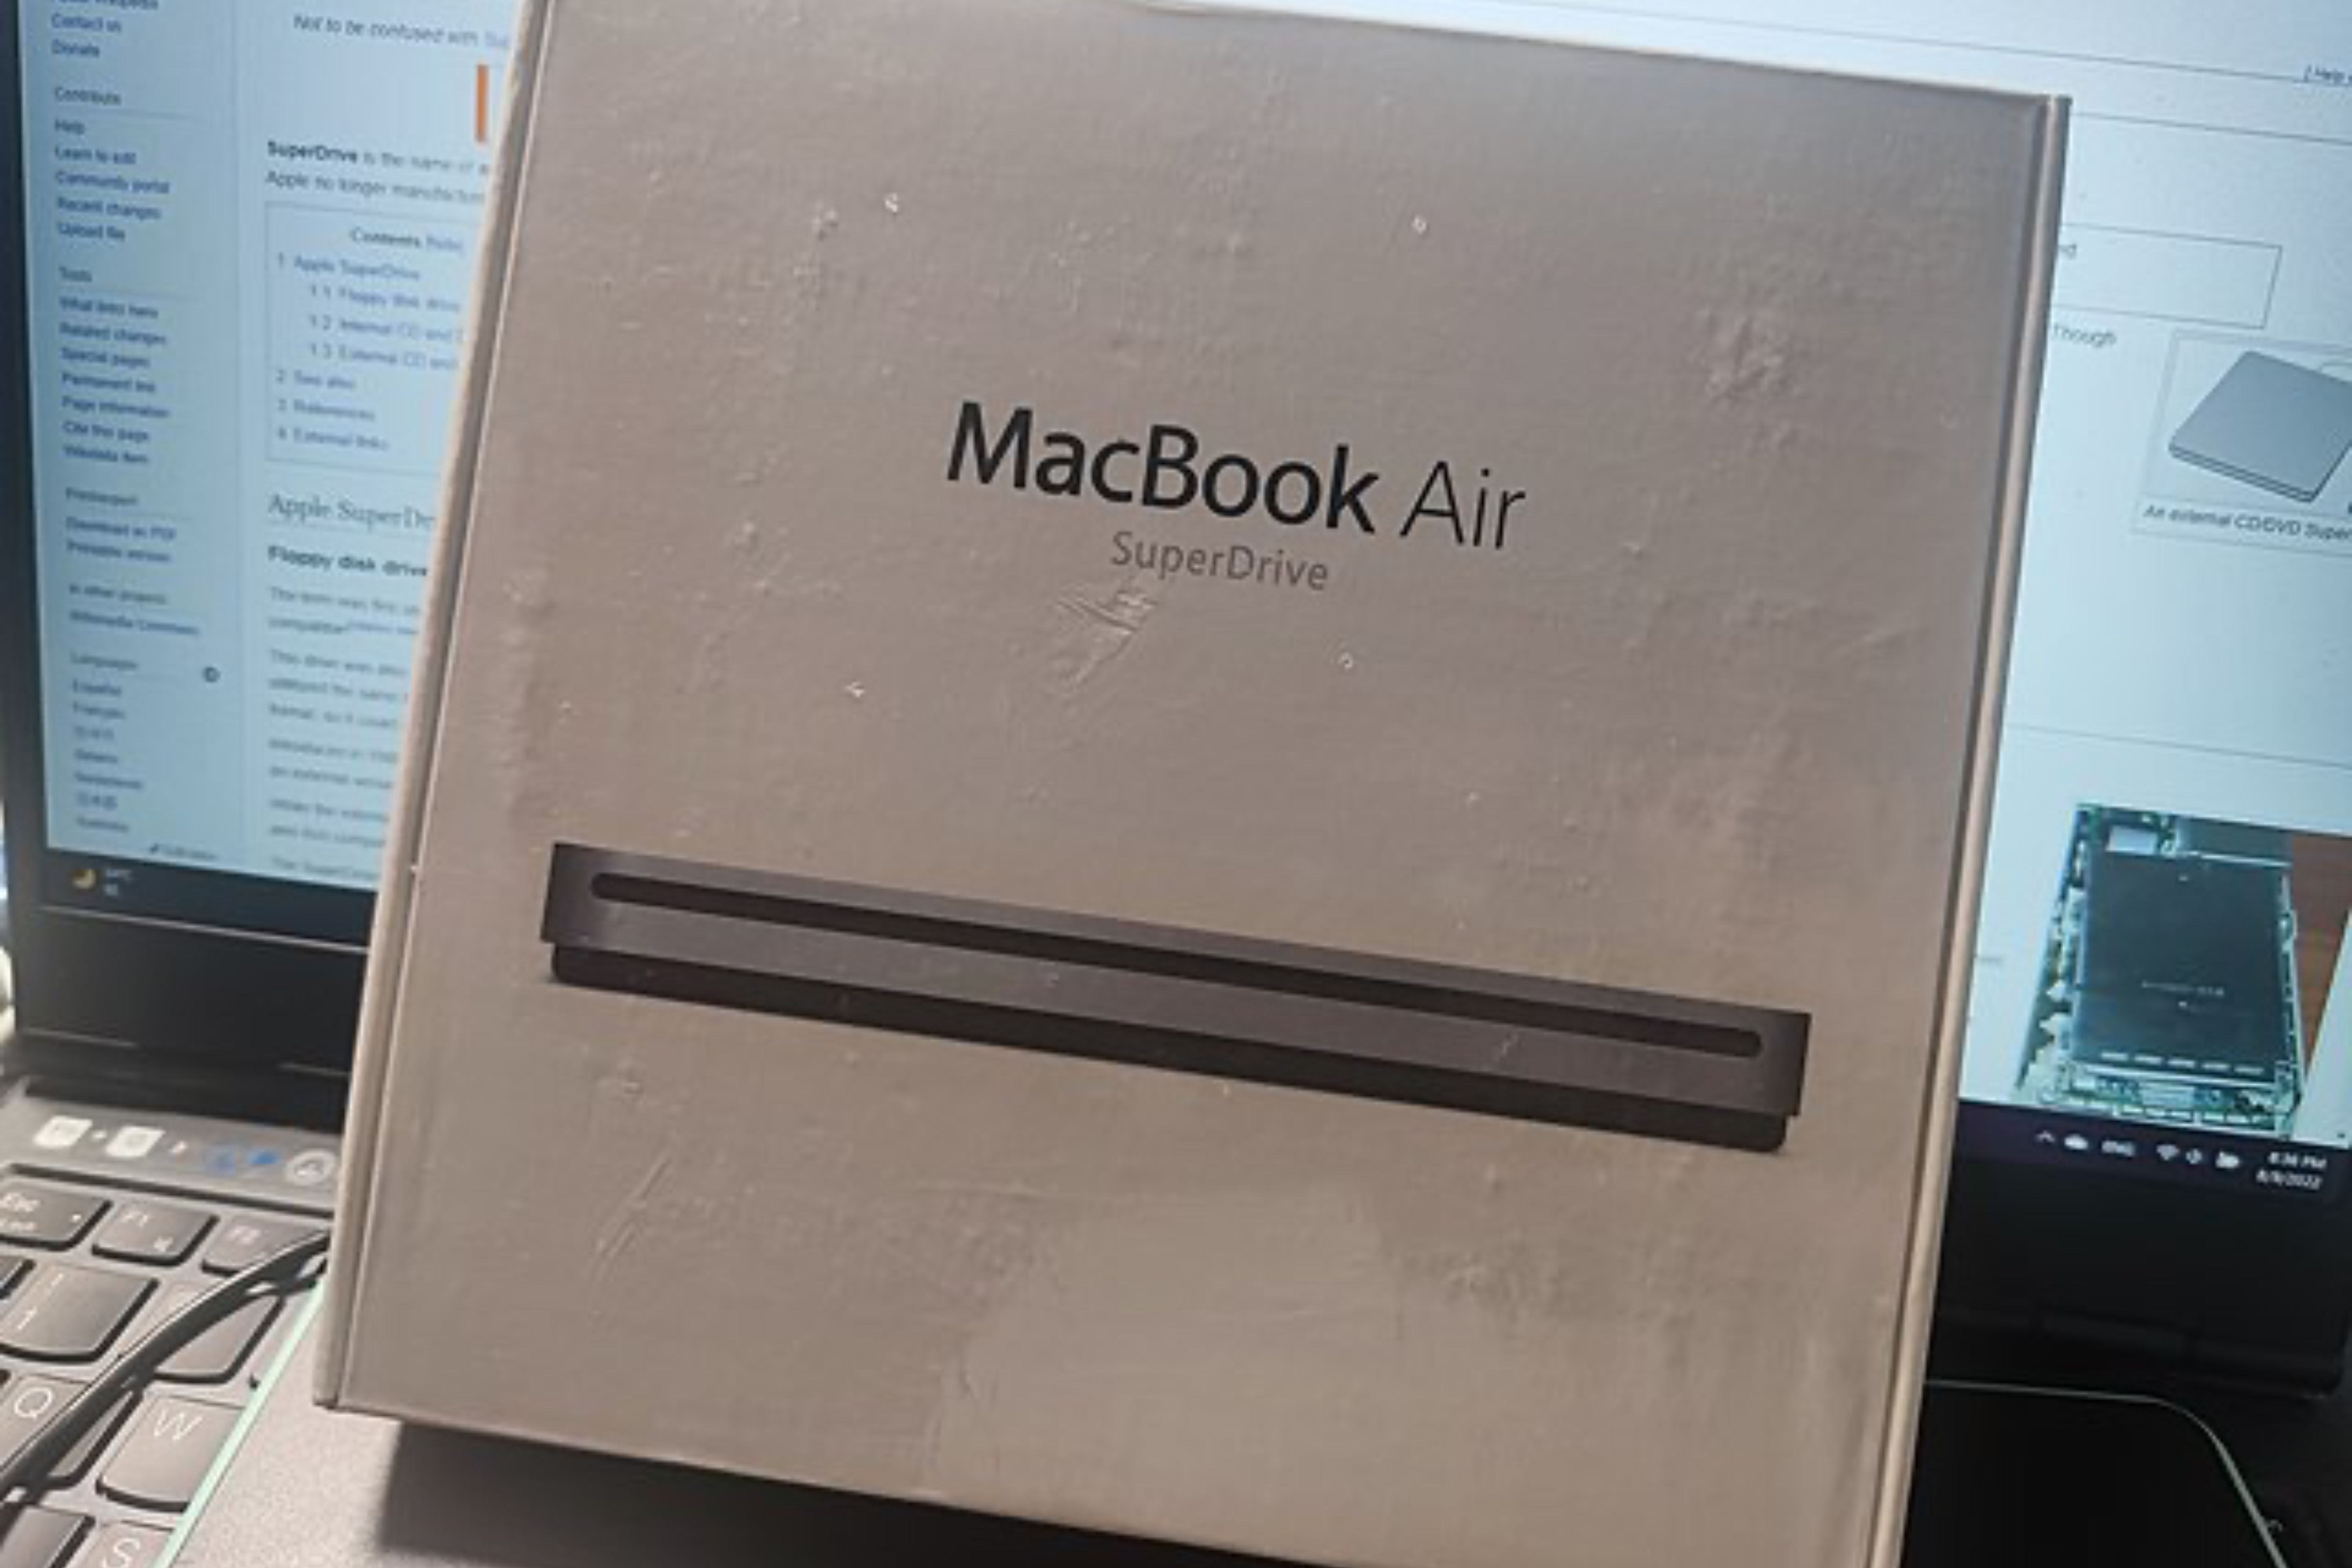 The box for a MacBook Air SuperDrive.